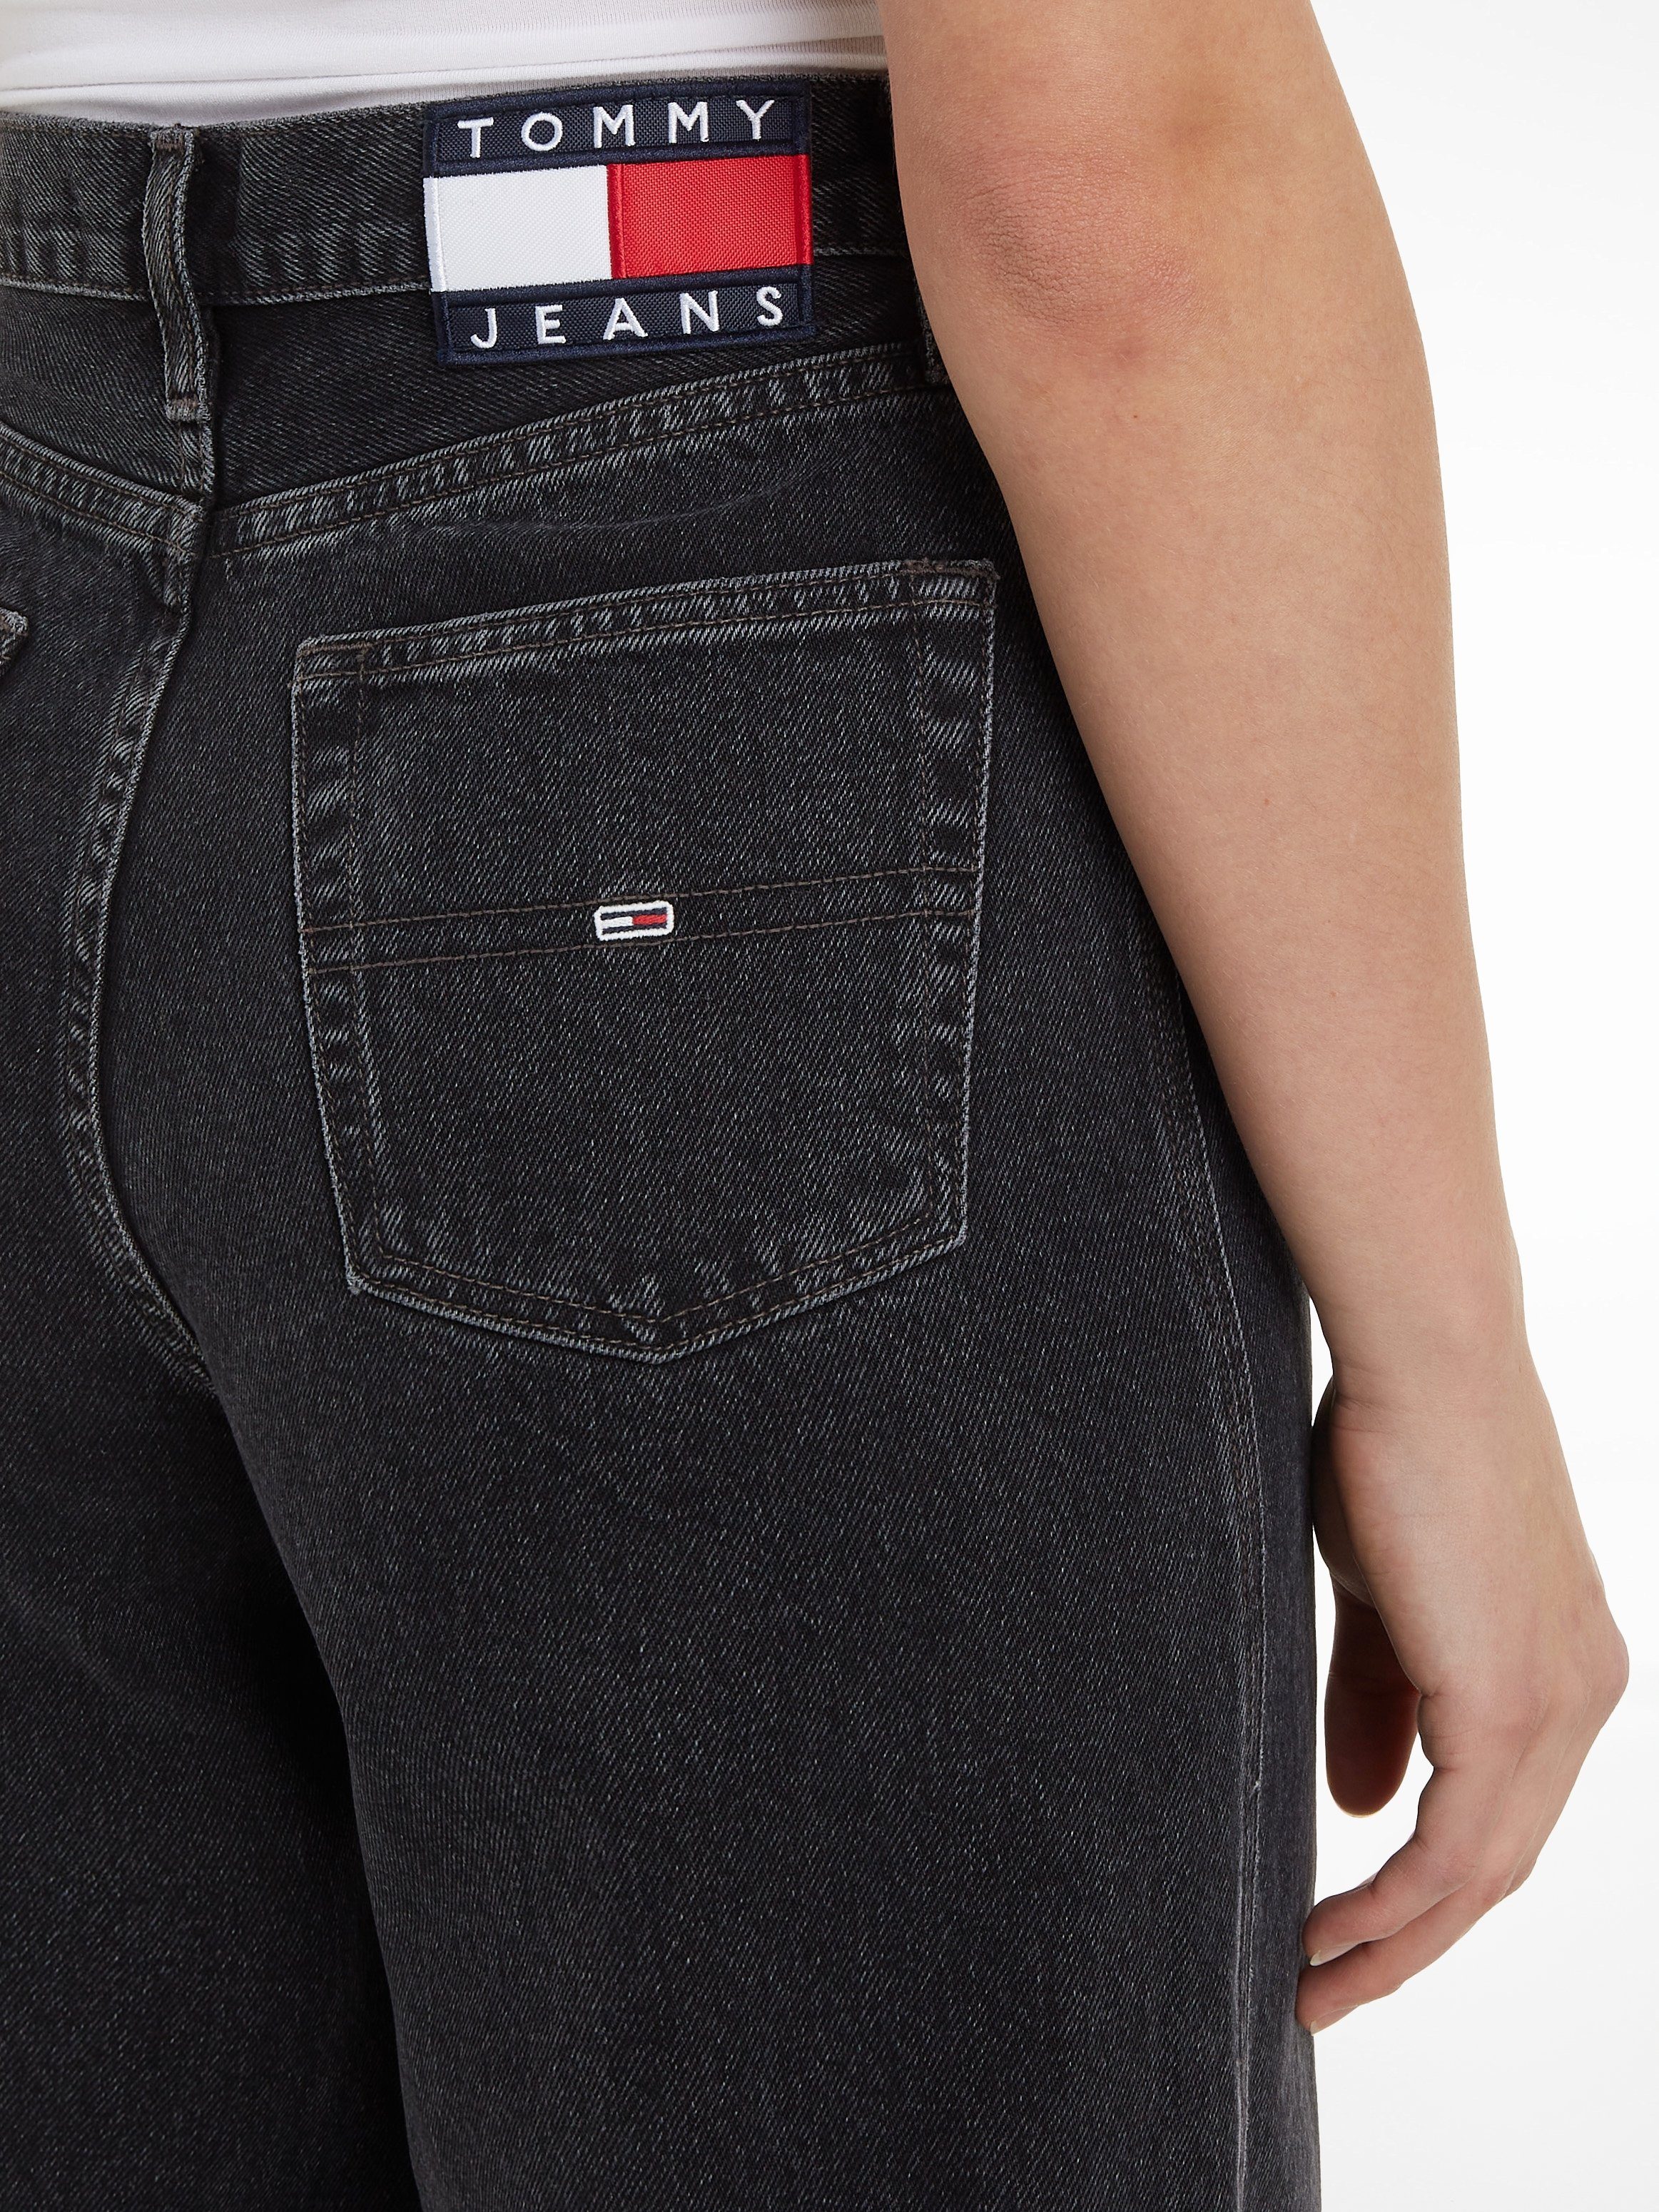 Jeans Jeans Jeans black Weite Tommy Logobadges mit Tommy